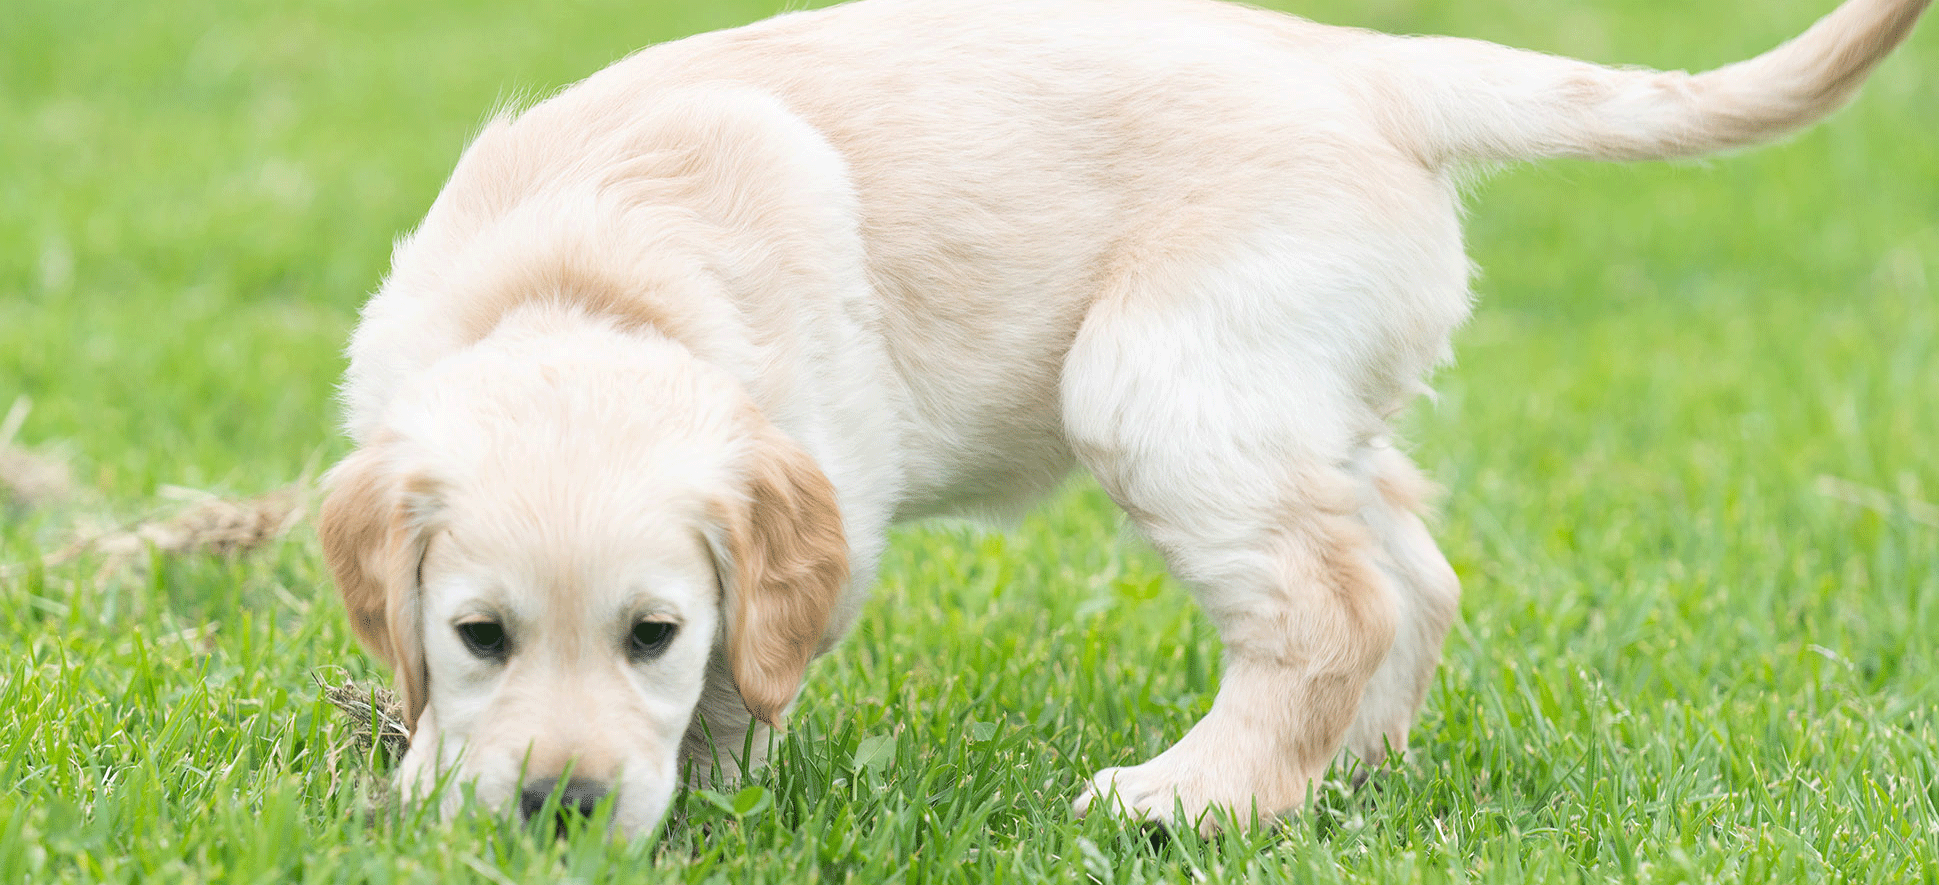 Yellow Puppy sniffing grass